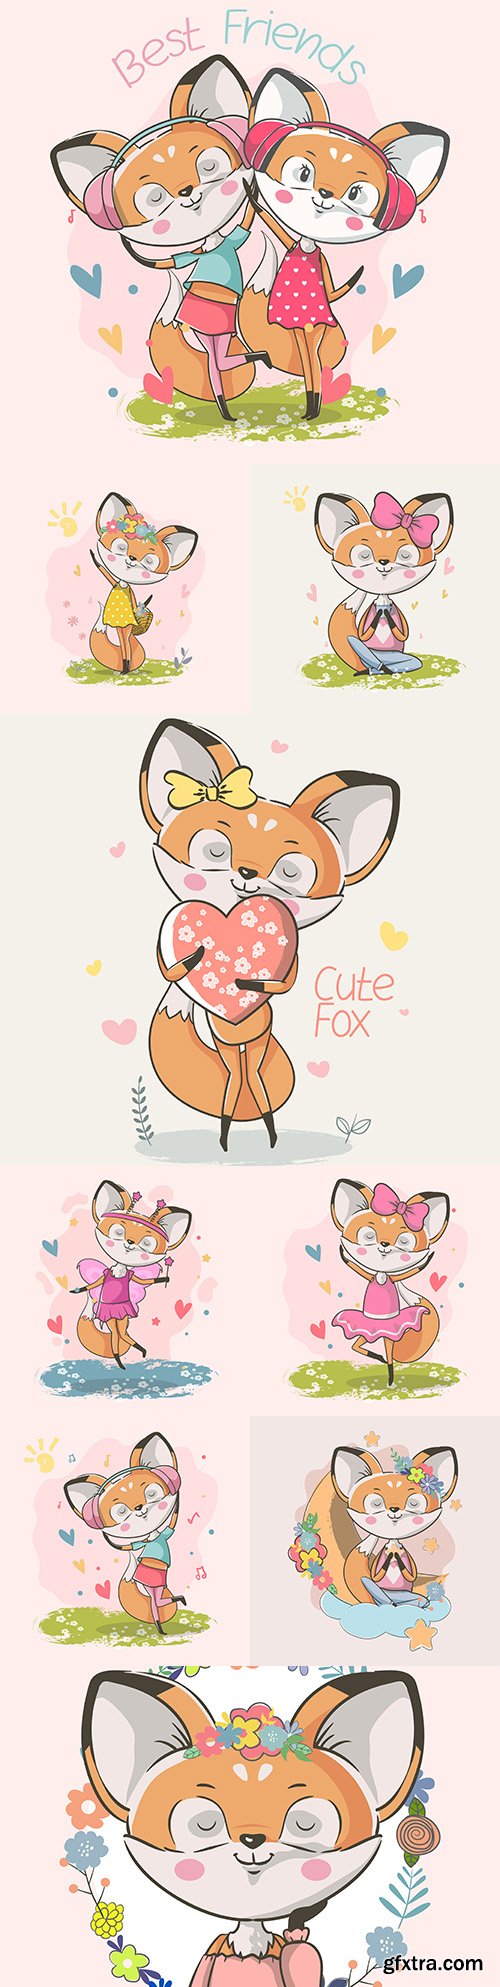 Cute little fox fashion with colors painted illustrations
